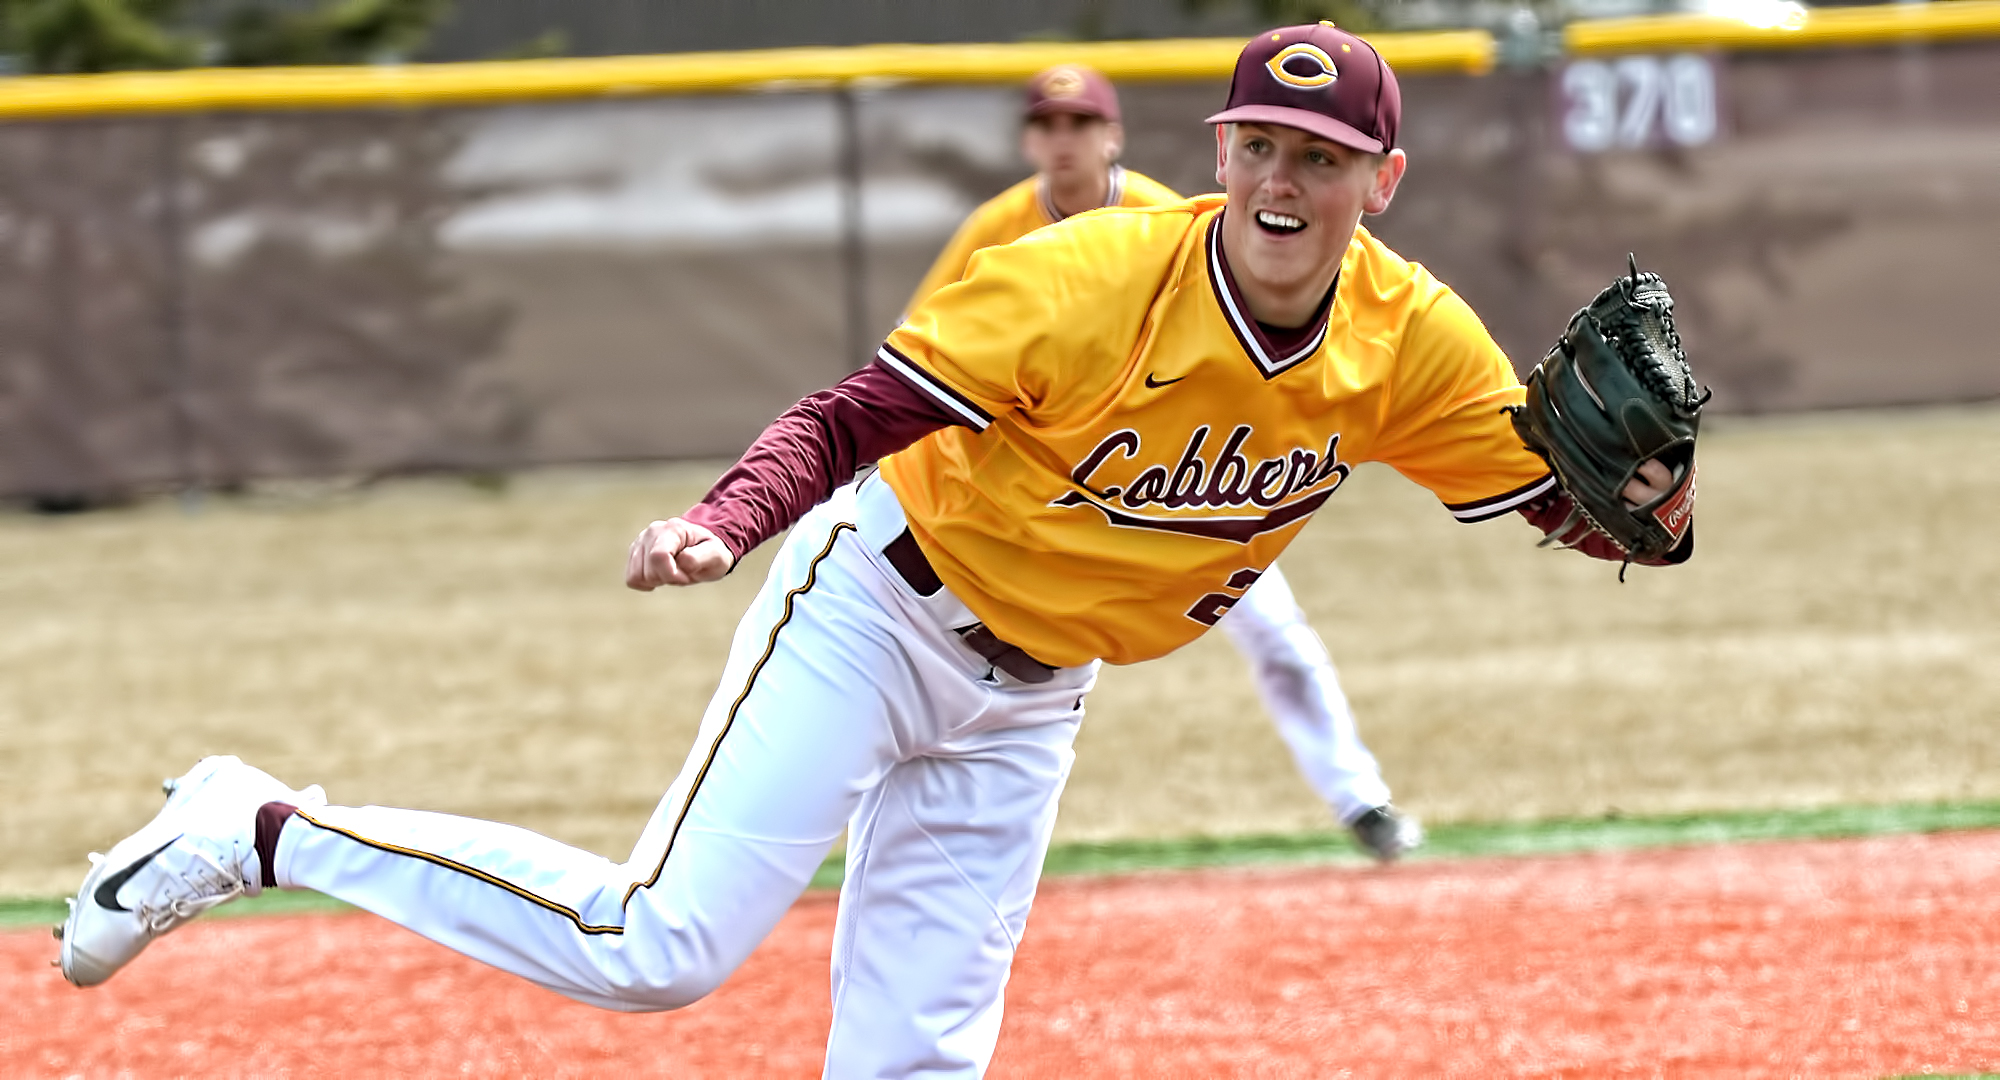 Super senior Cole Christensen recorded a career-high 12 strikeouts and pitched 8.0 scoreless innings to help the Cobbers gain a split with Augsburg in the MIAC opener.